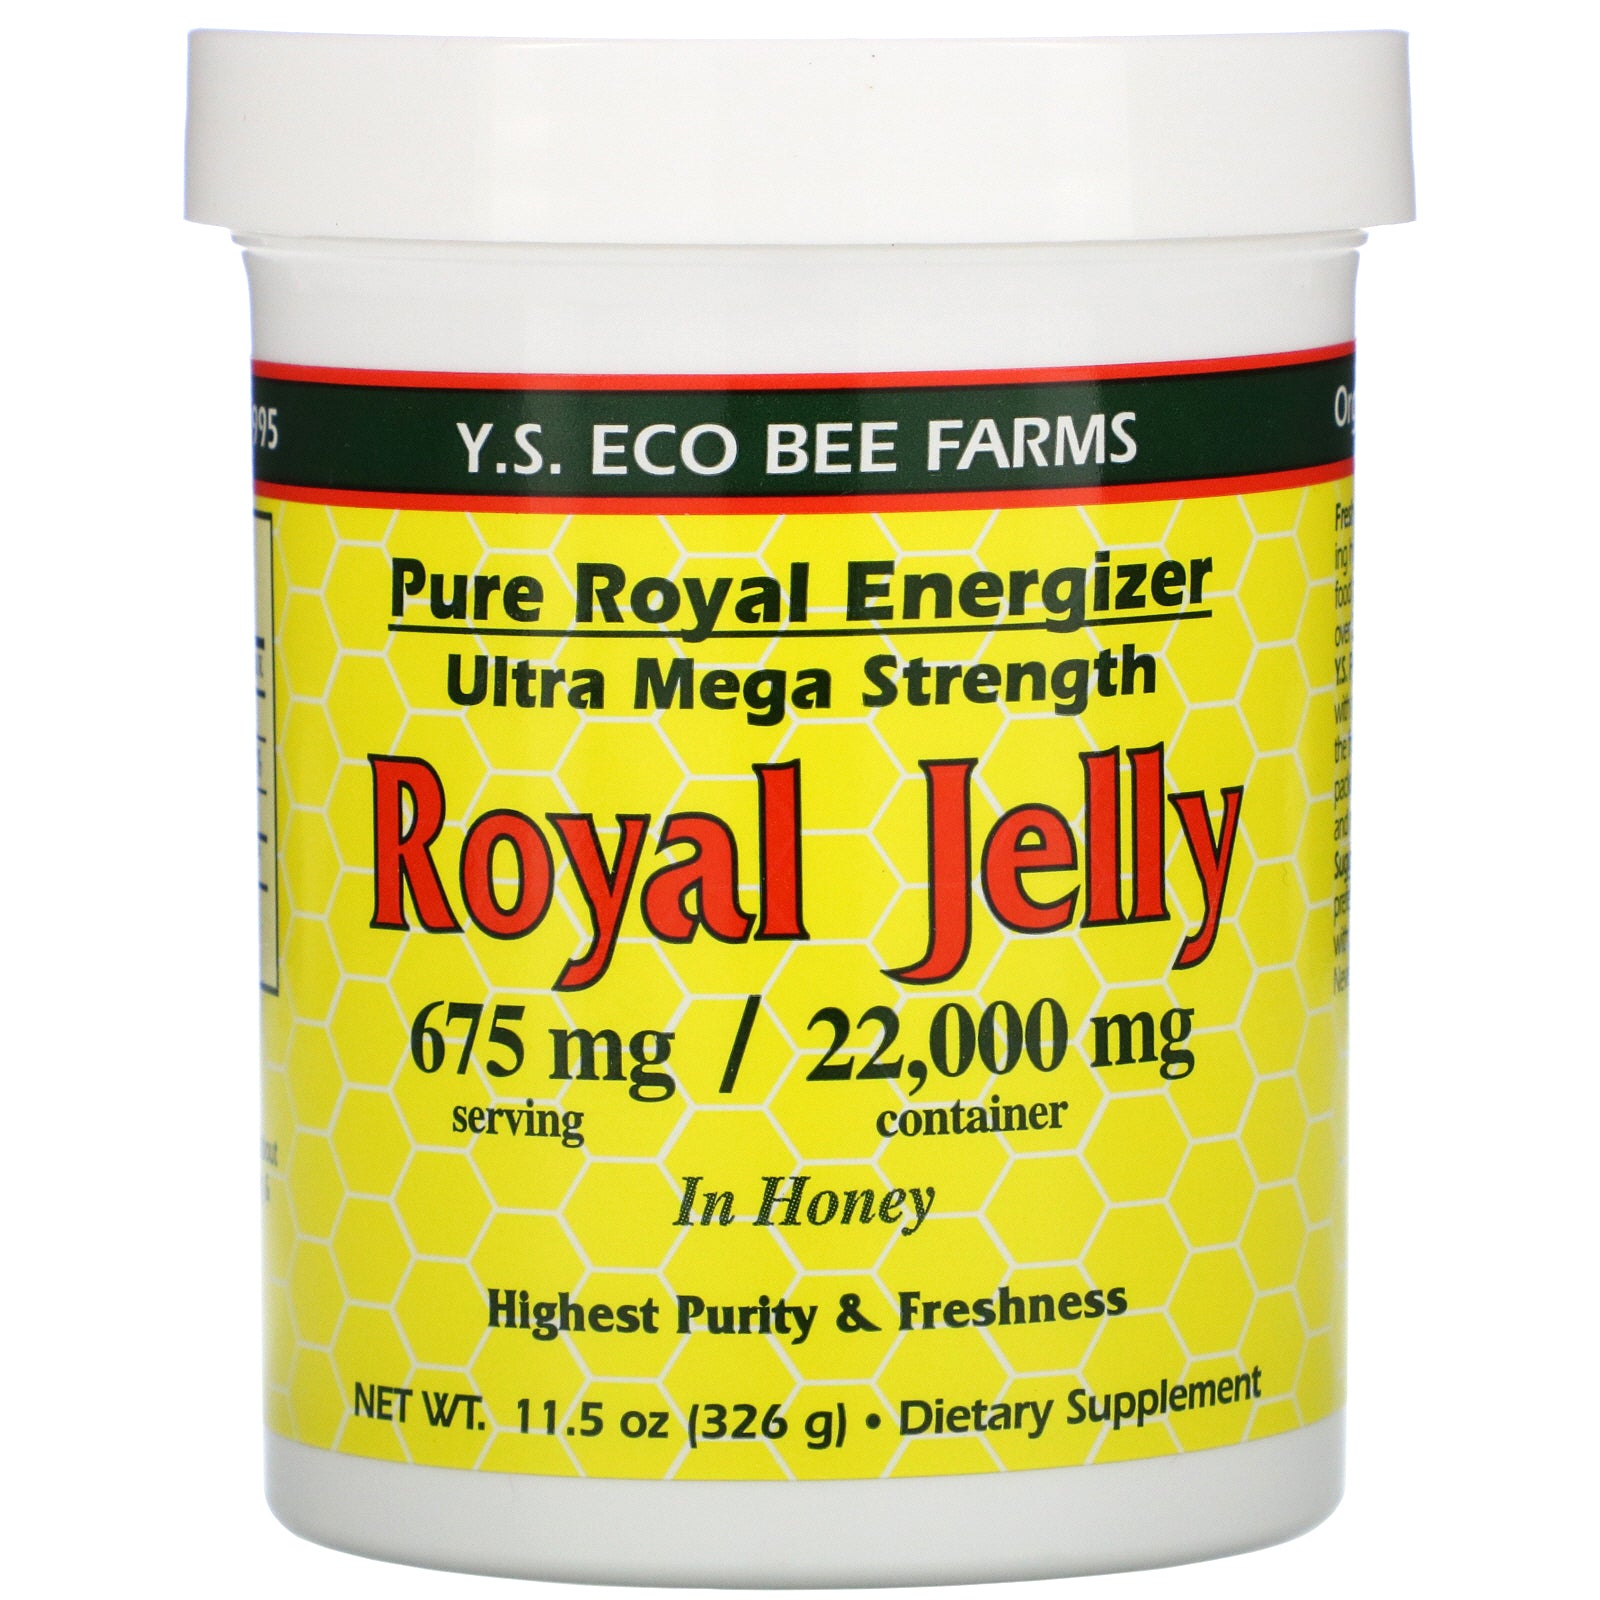 Y.S. Eco Bee Farms, Royal Jelly In Honey, 675 mg